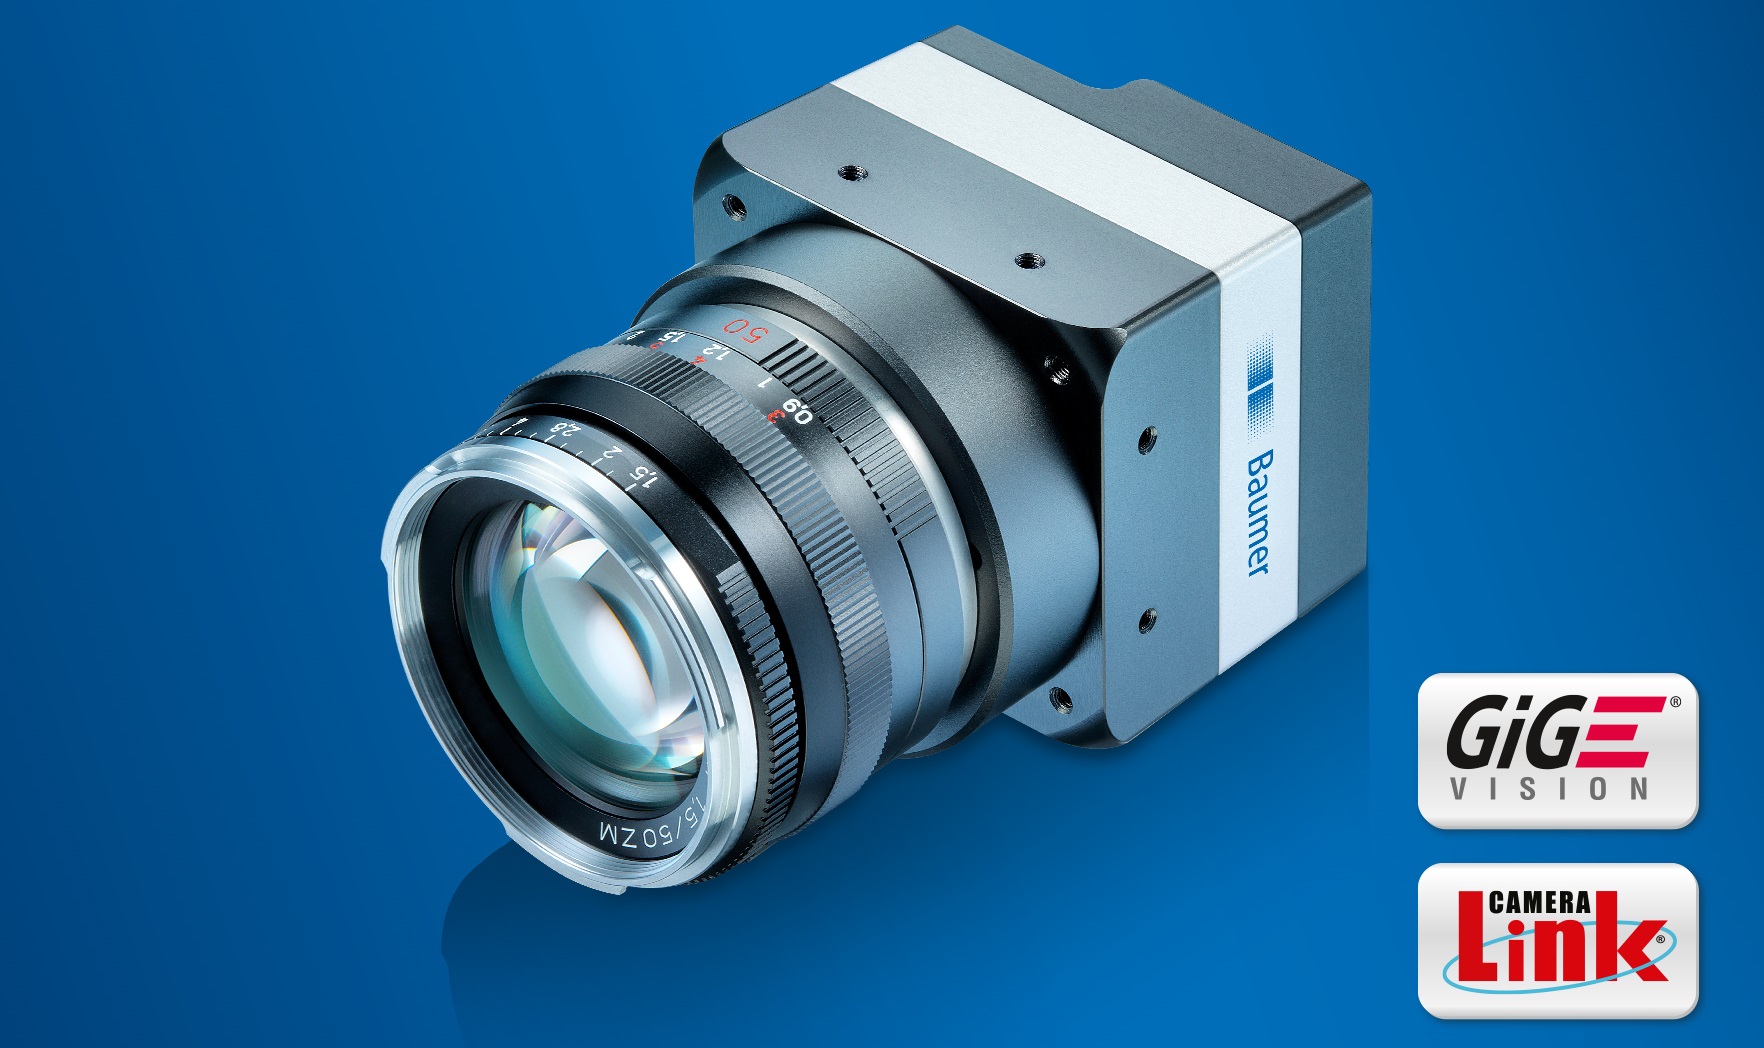 The new high-resolution LX cameras with 48 megapixels and up to 15 fps provide high resolution and excellent image quality to set new standards in highly-dynamic applications.